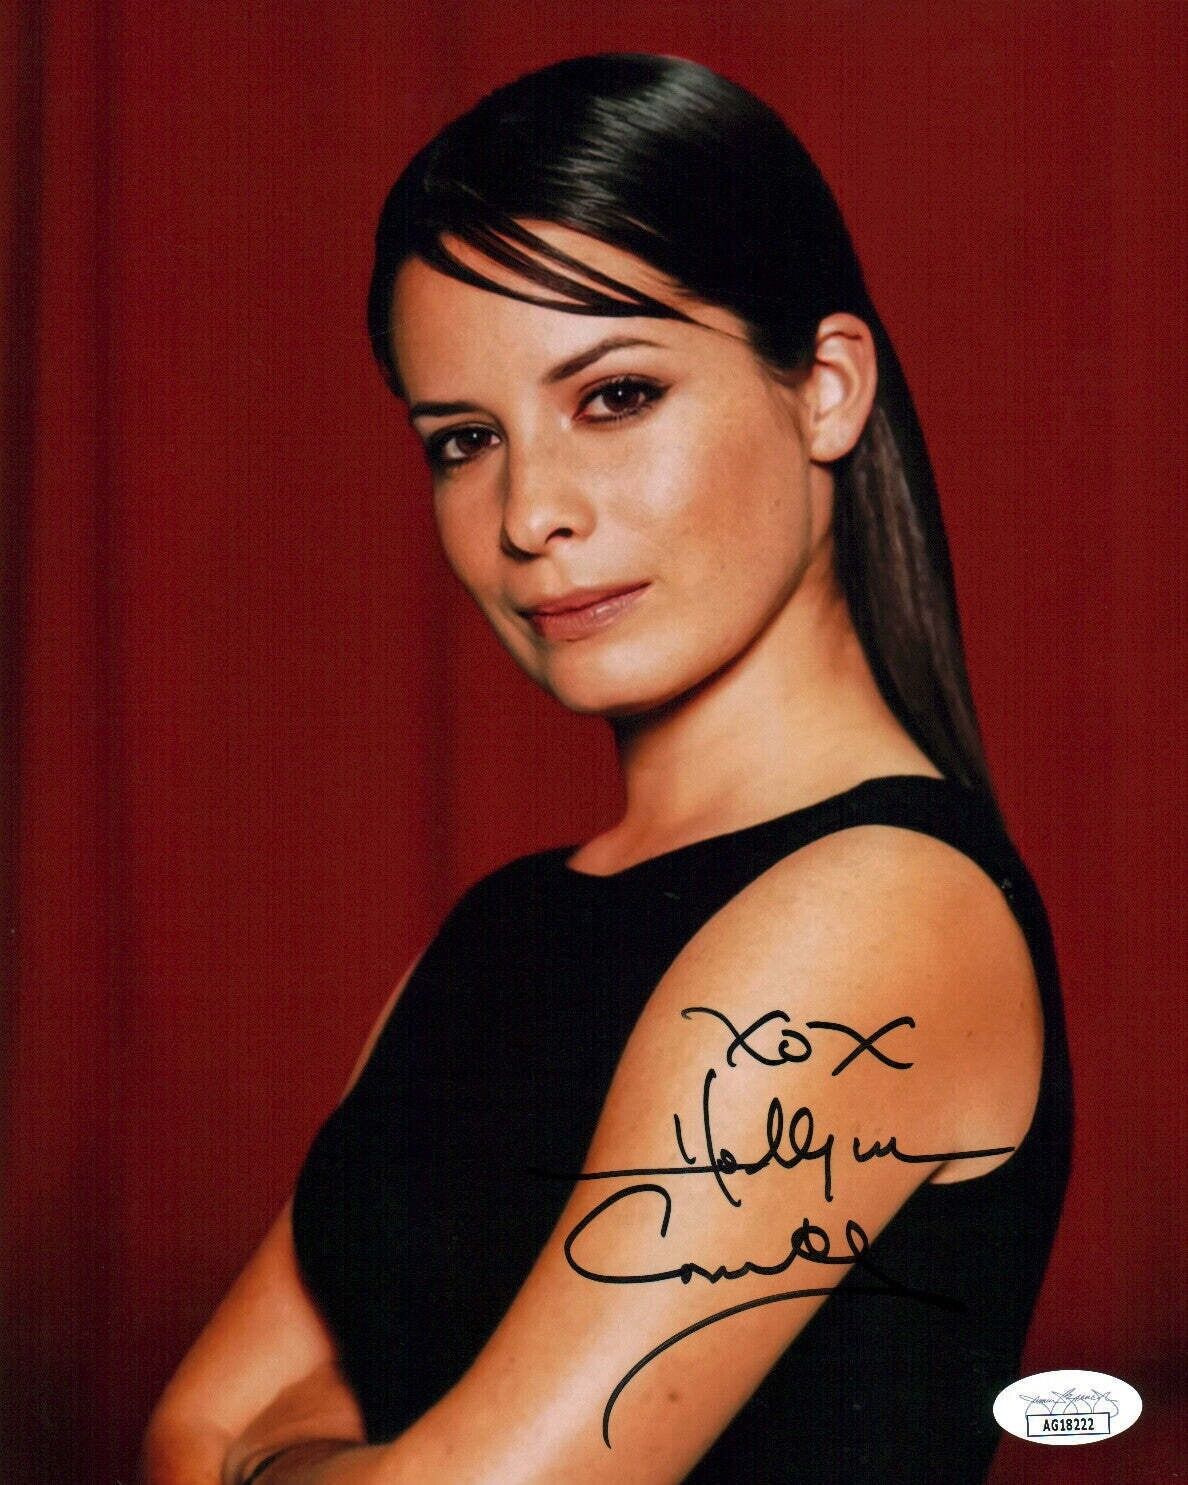 Holly Marie Combs Charmed 8x10 Signed Photo JSA Certified Autograph GalaxyCon